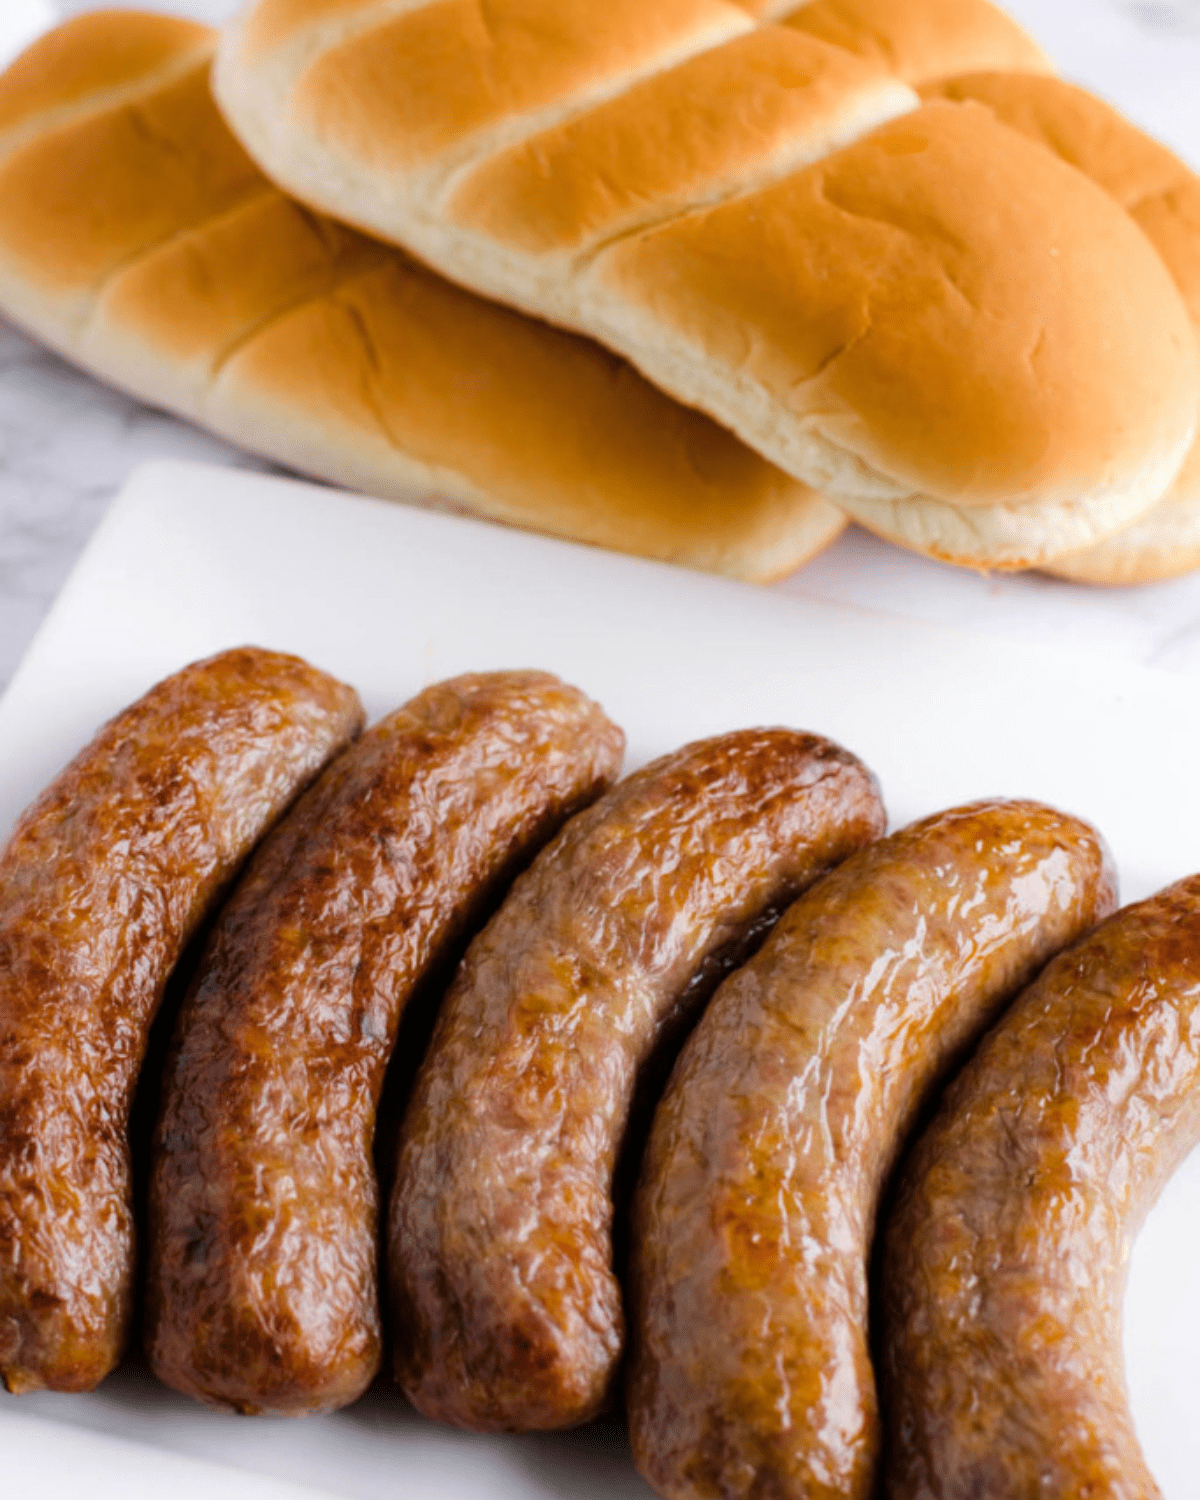 Air fryer brats on a white plate with buns